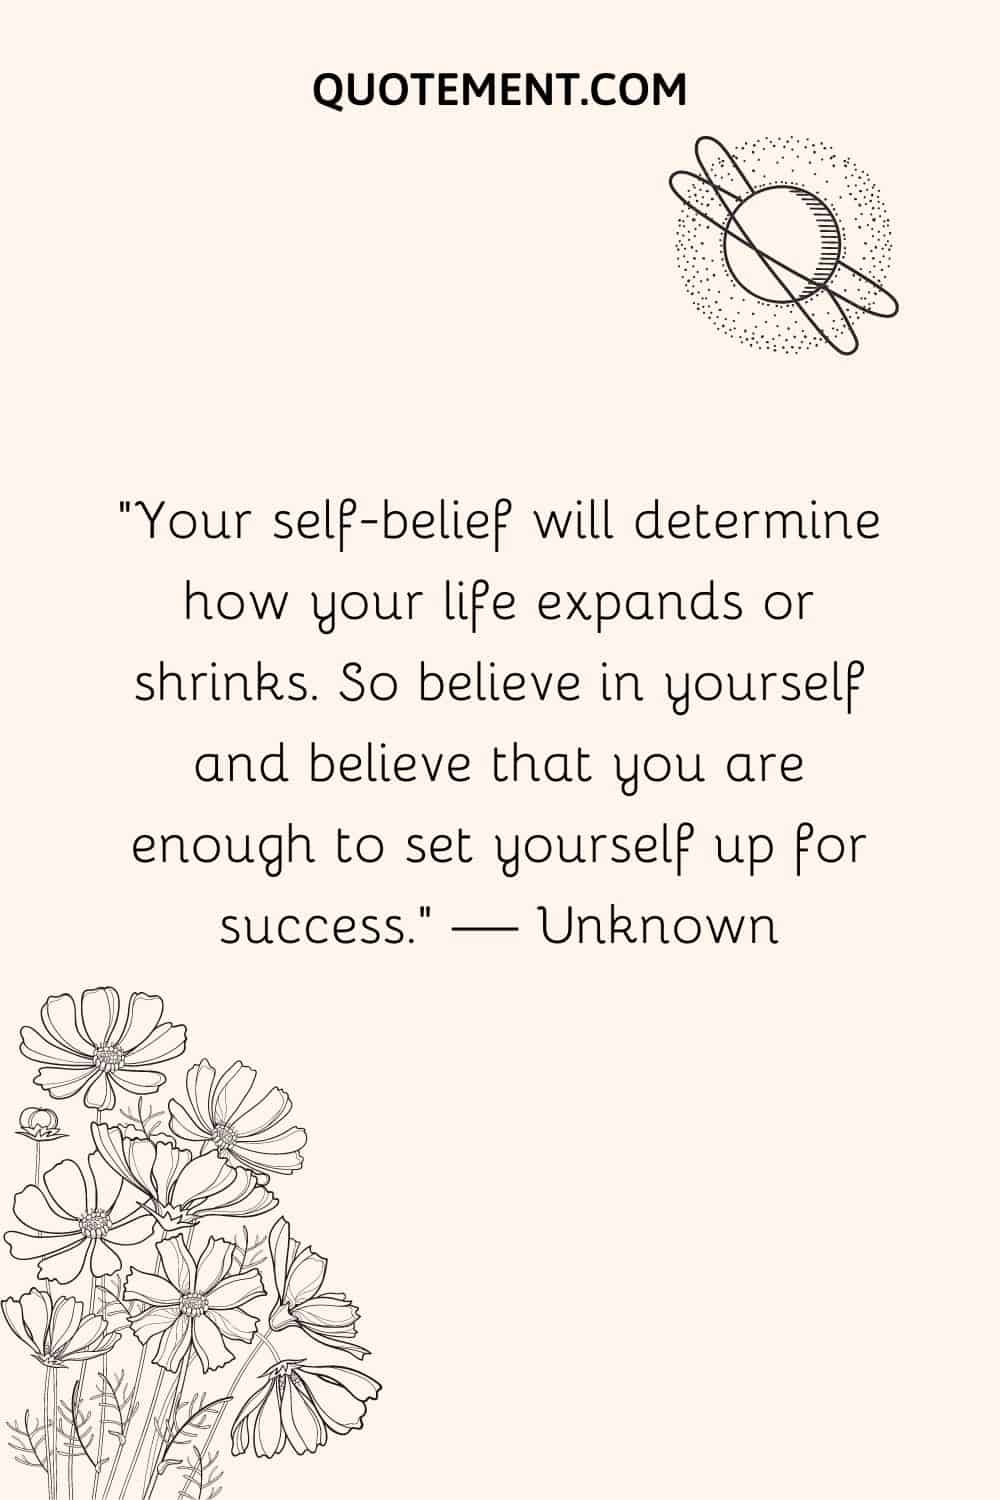 Your self-belief will determine how your life expands or shrinks